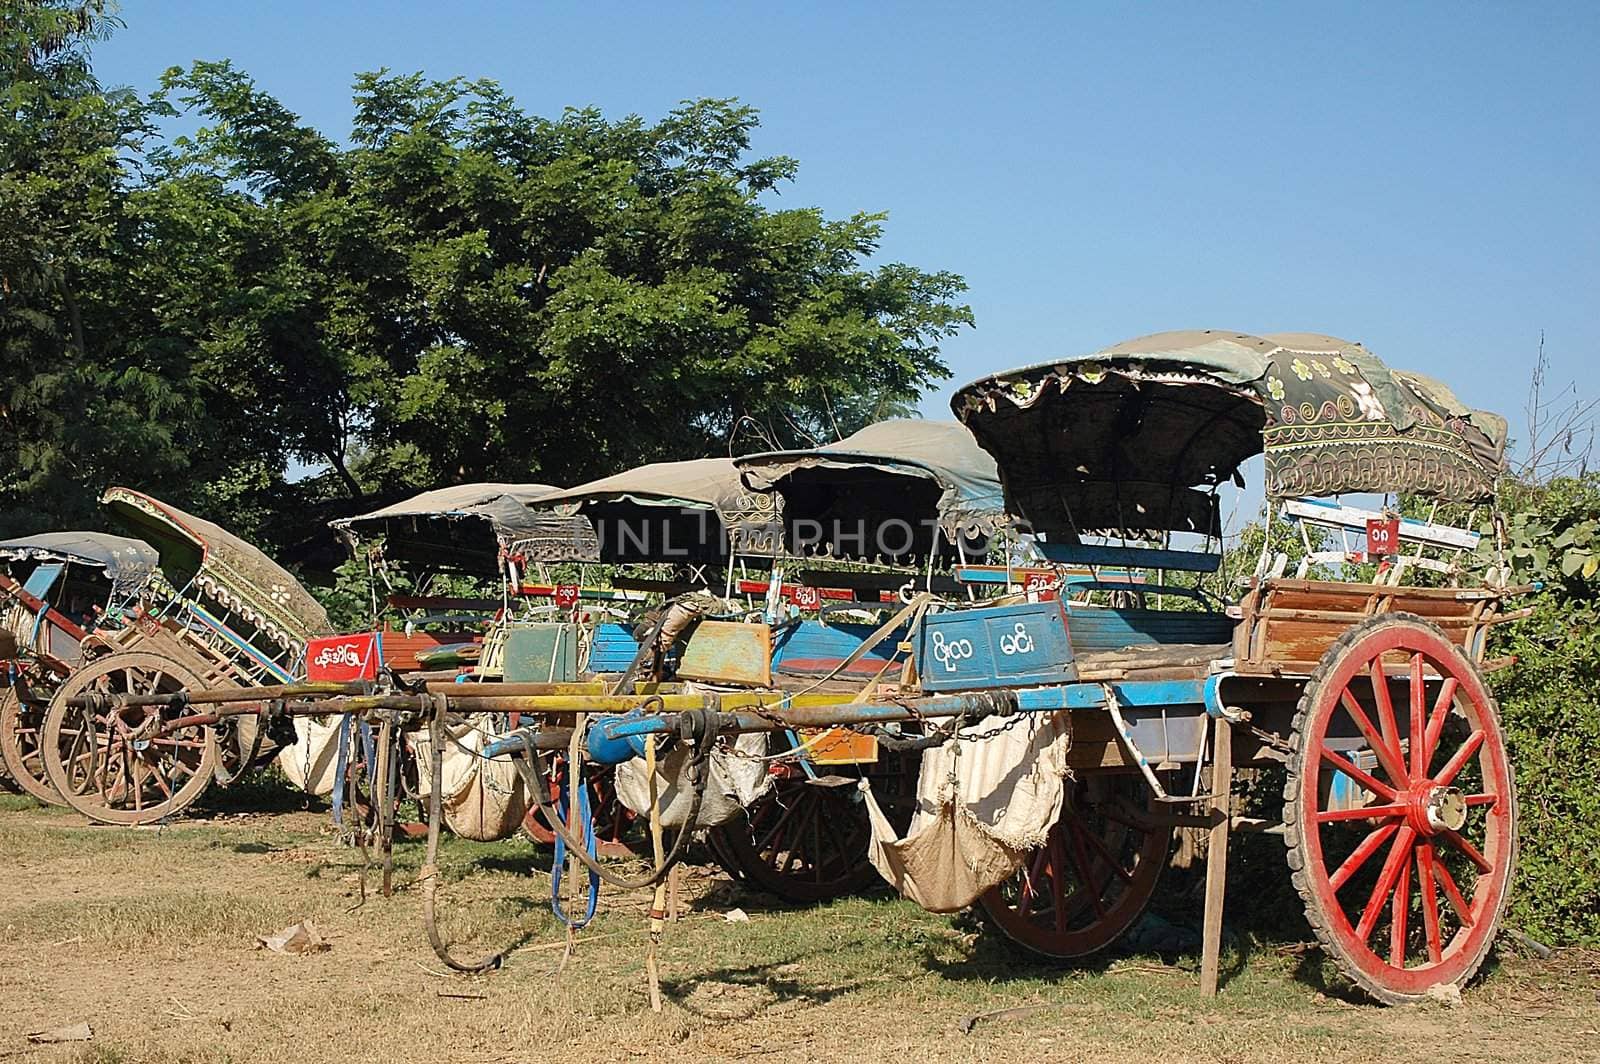 Group of bullock cart parked at the road side